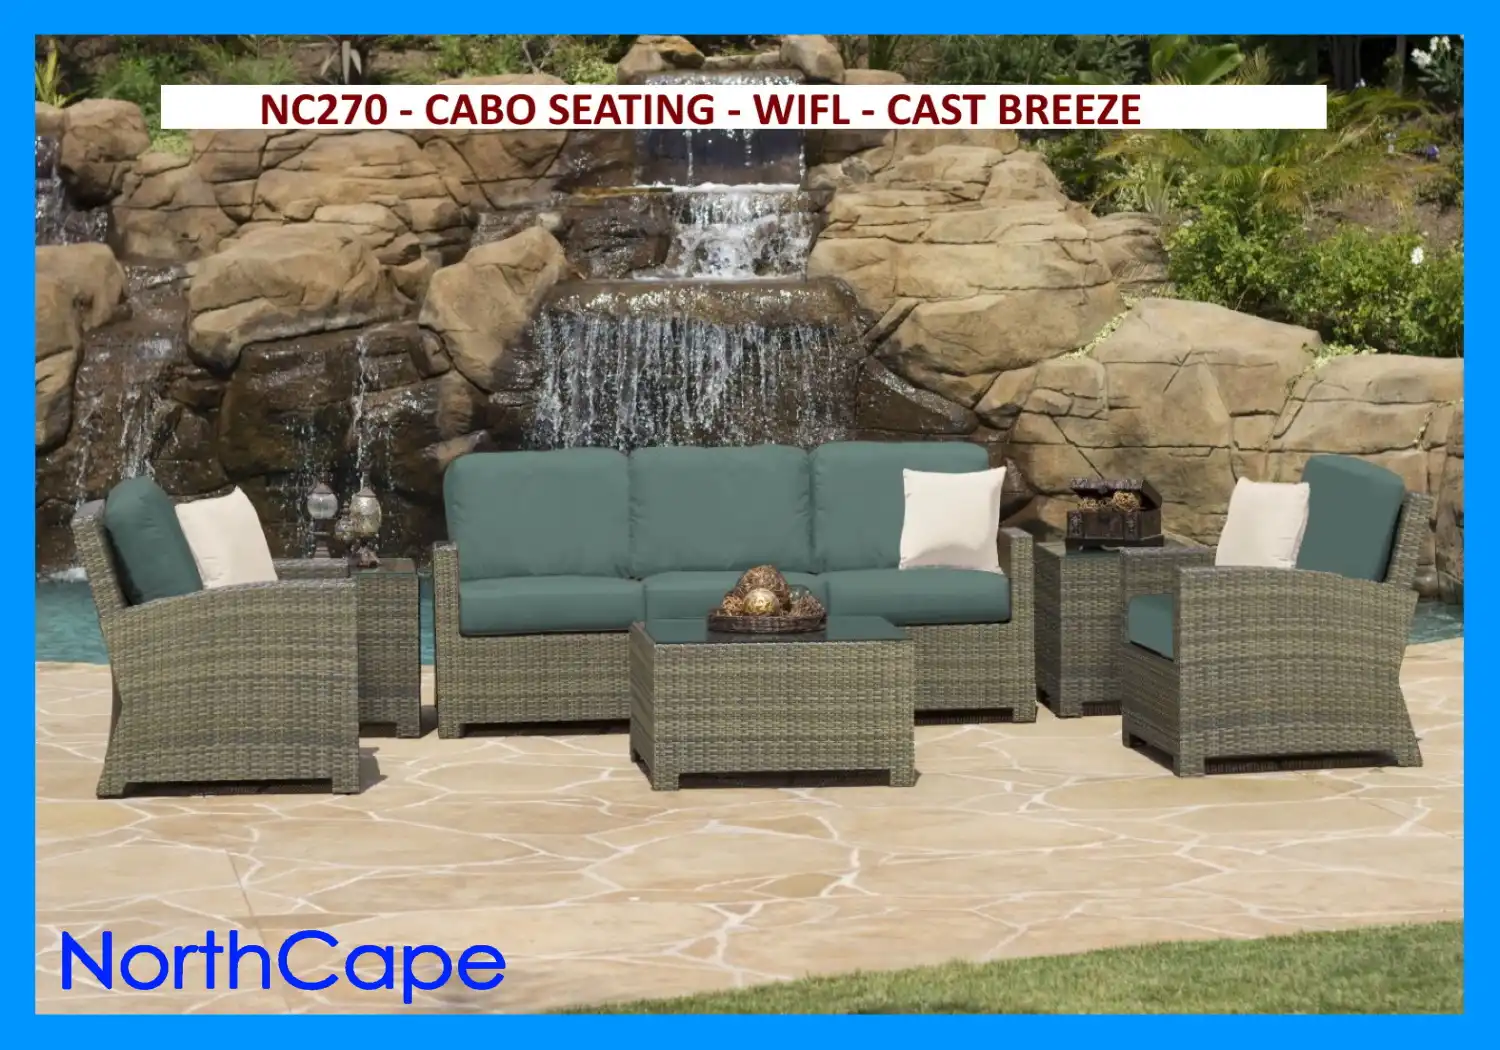 NC0270 - CABO SEATING - SOFA & LOUNGE CHAIRS WIFL - CAST BREEZE